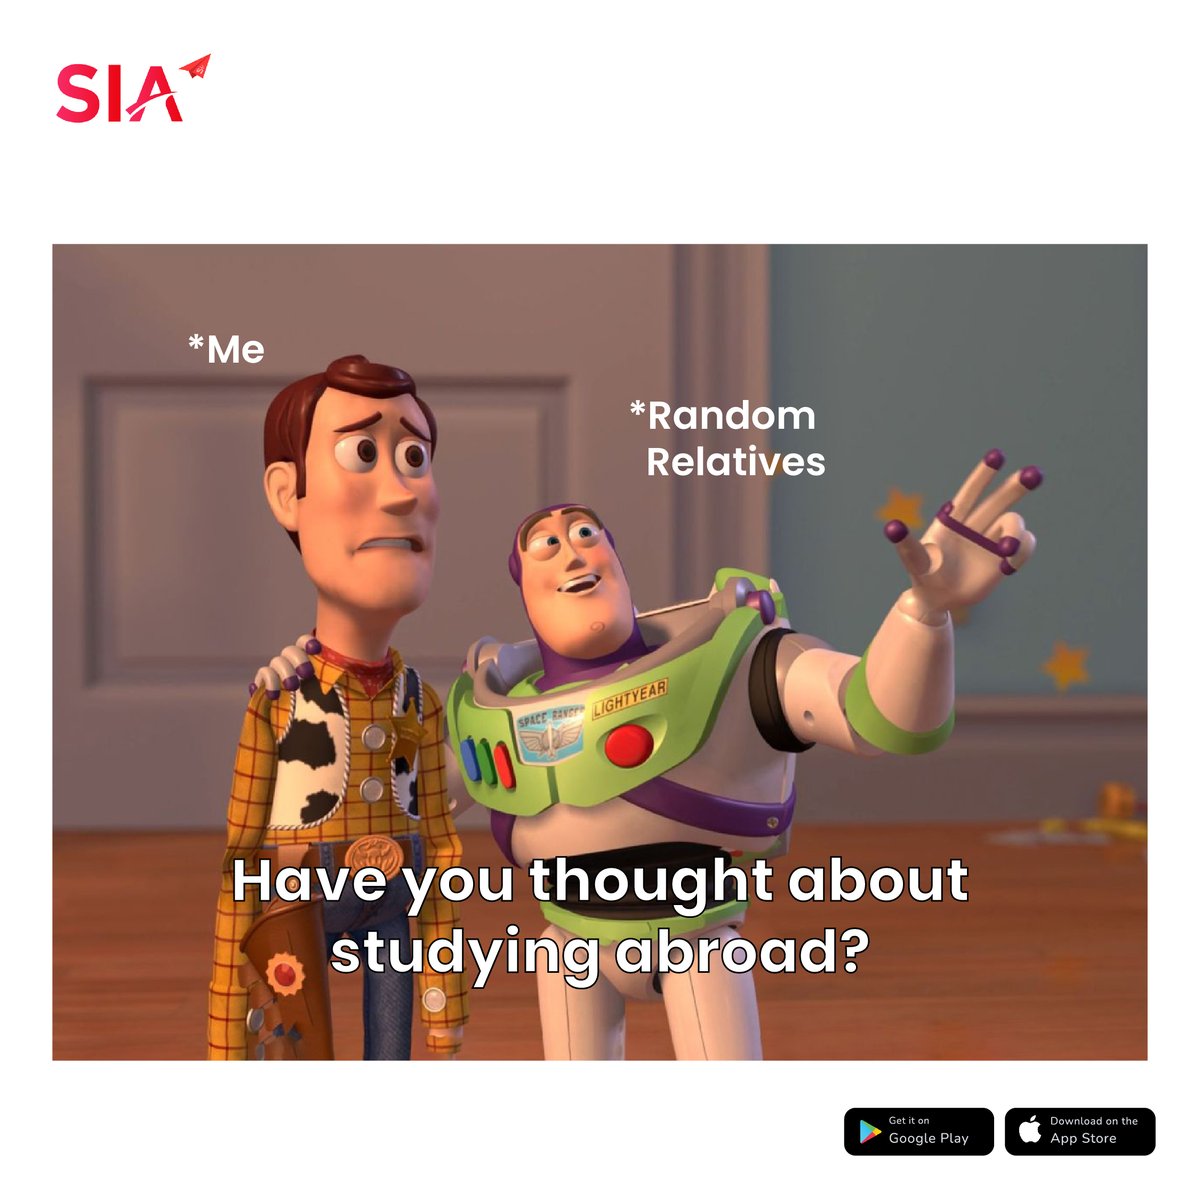 They be giving advice on everything fr!

#relatives #memes #SIA #SIAmemes #toystory #toystorymemes #StudyInAustralia #StudentLife #DreamCollege #studyabroadlife #studyabroadinaustralia